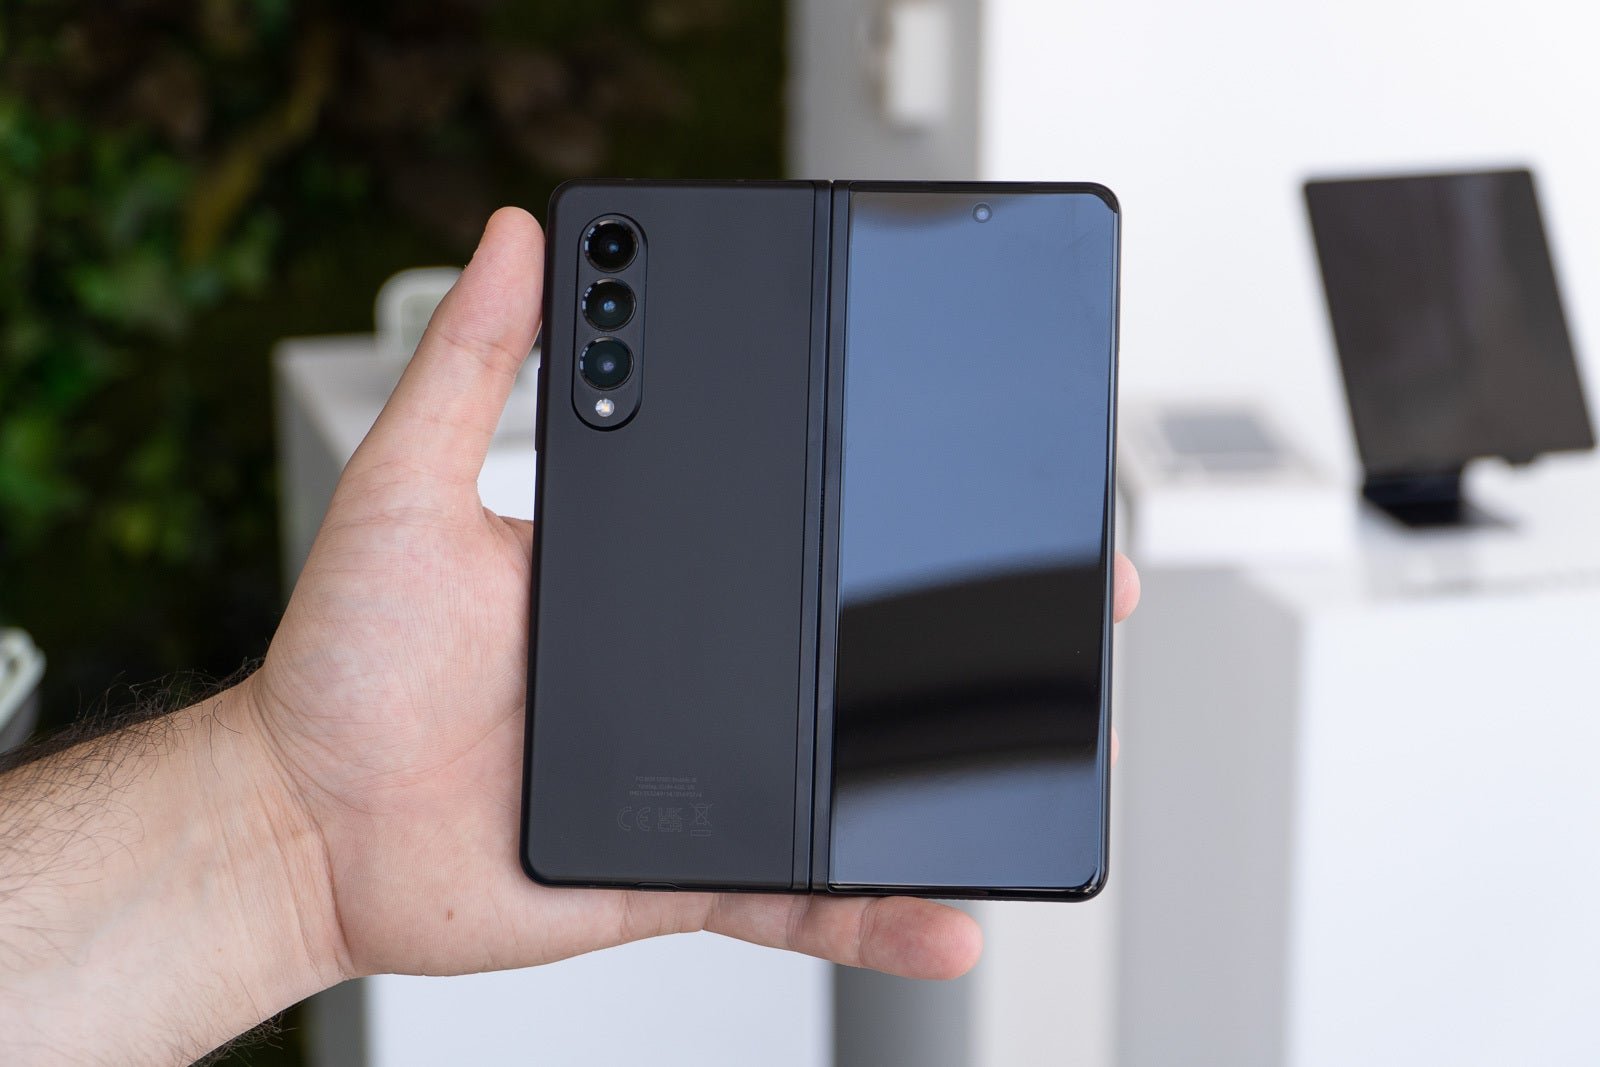 The Galaxy Z Fold 3 in real life - Galaxy Z Fold 3 camera: All you need to know